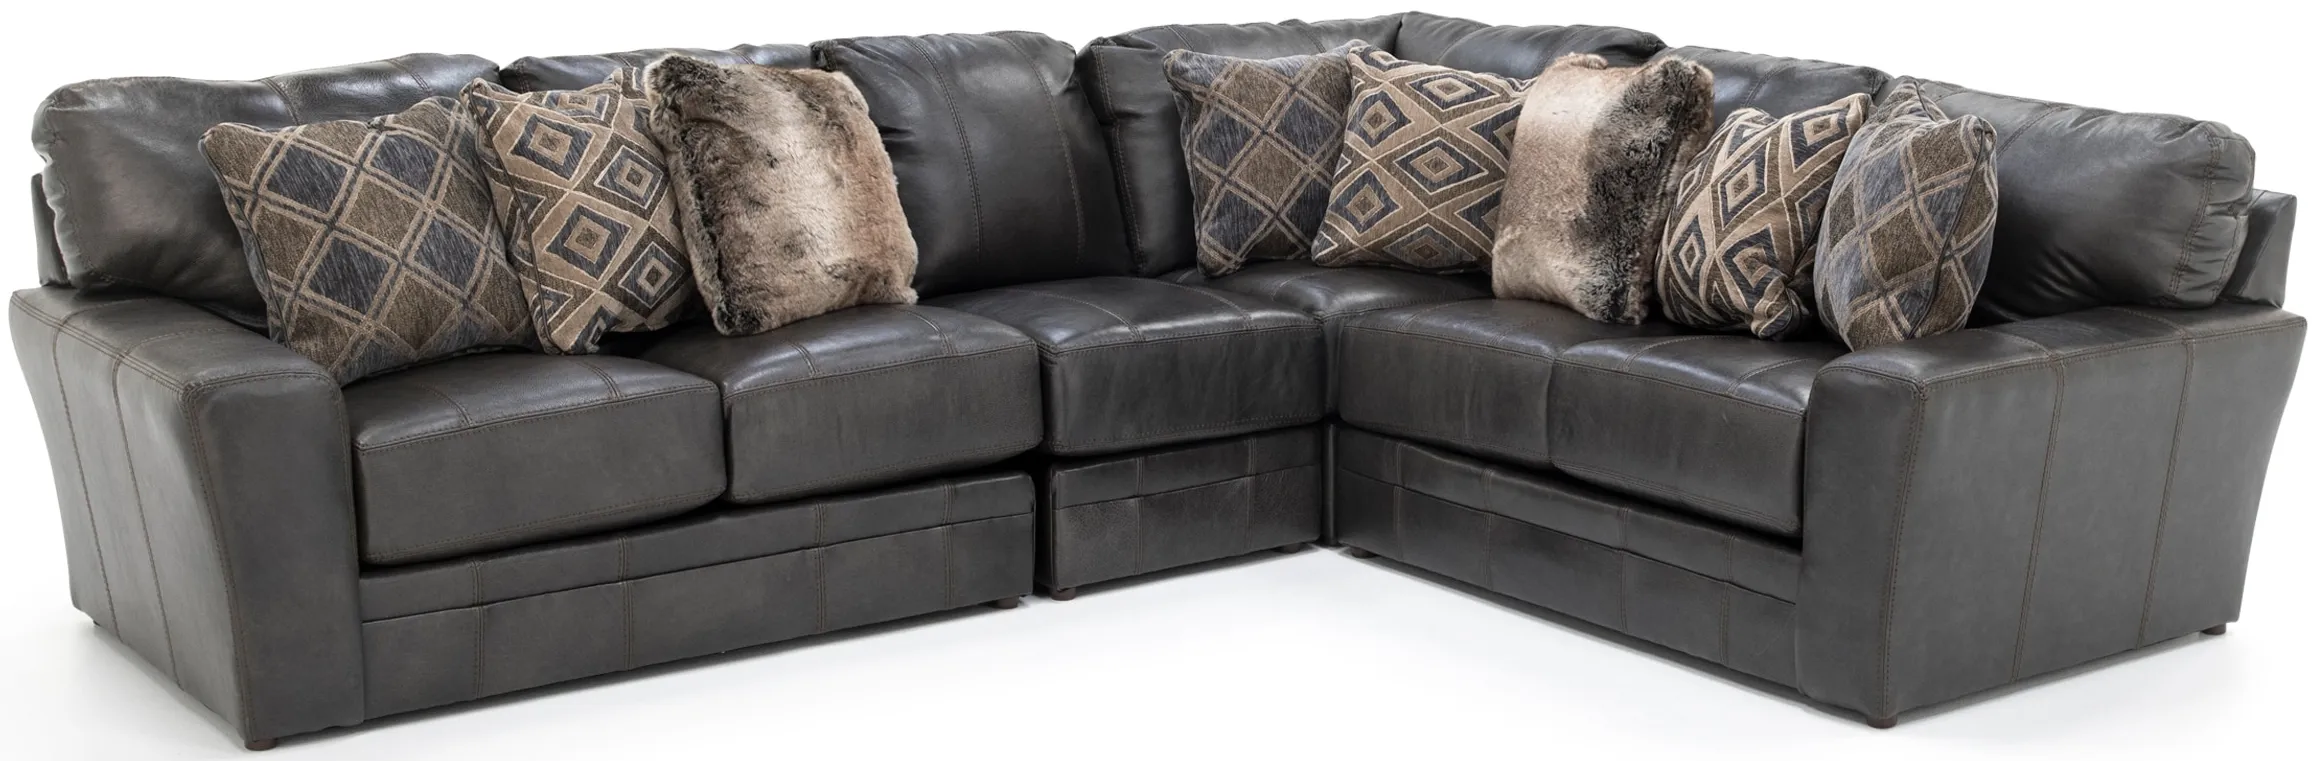 Camden 4-Pc. Leather Sectional 